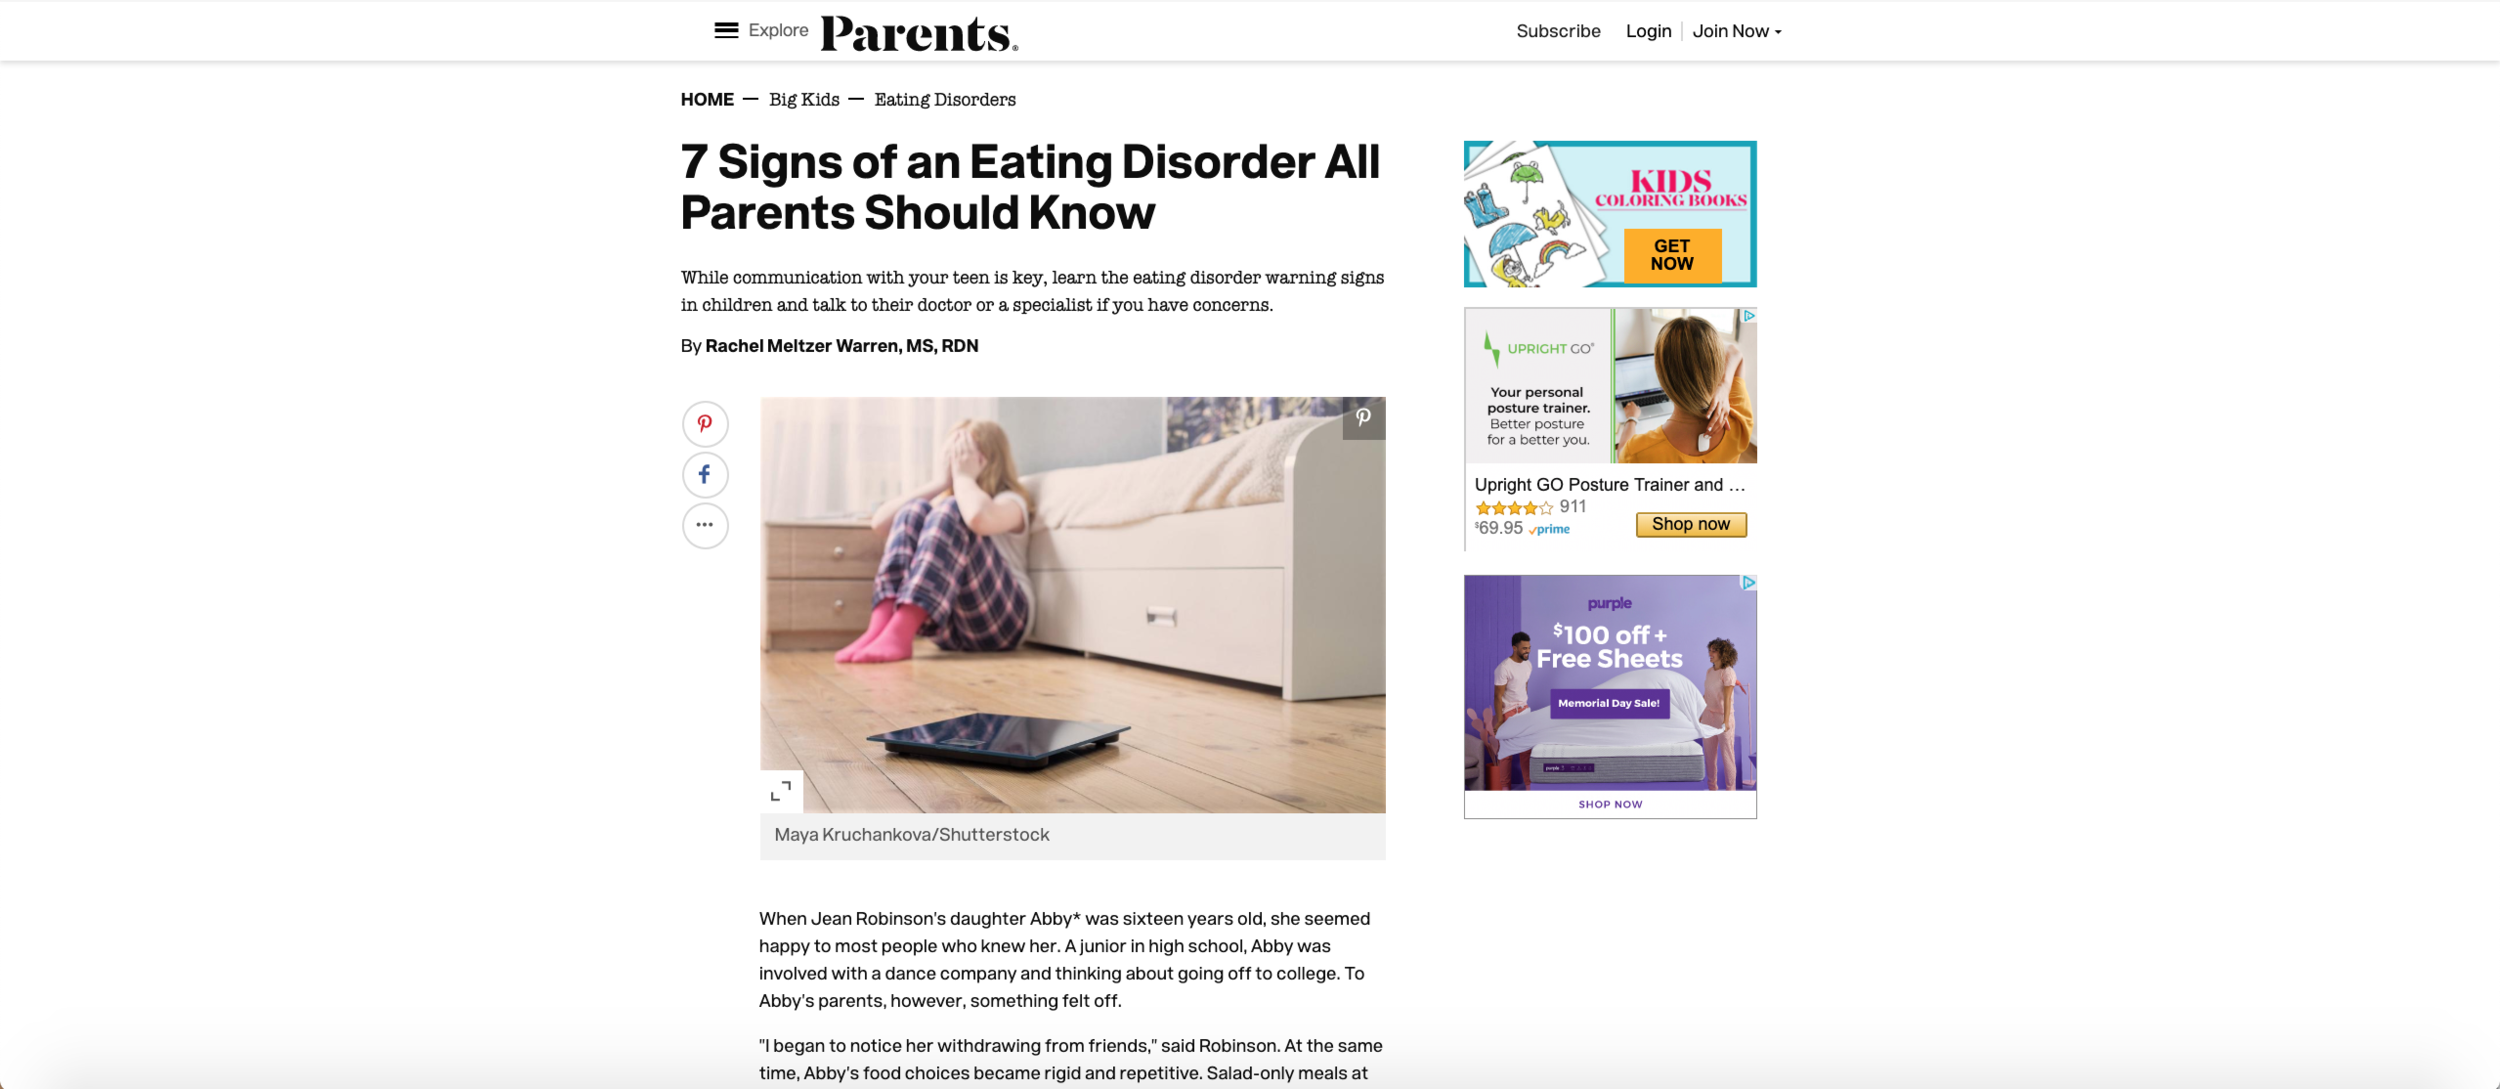 7 Signs of an Eating Disorder All Parents Should Know